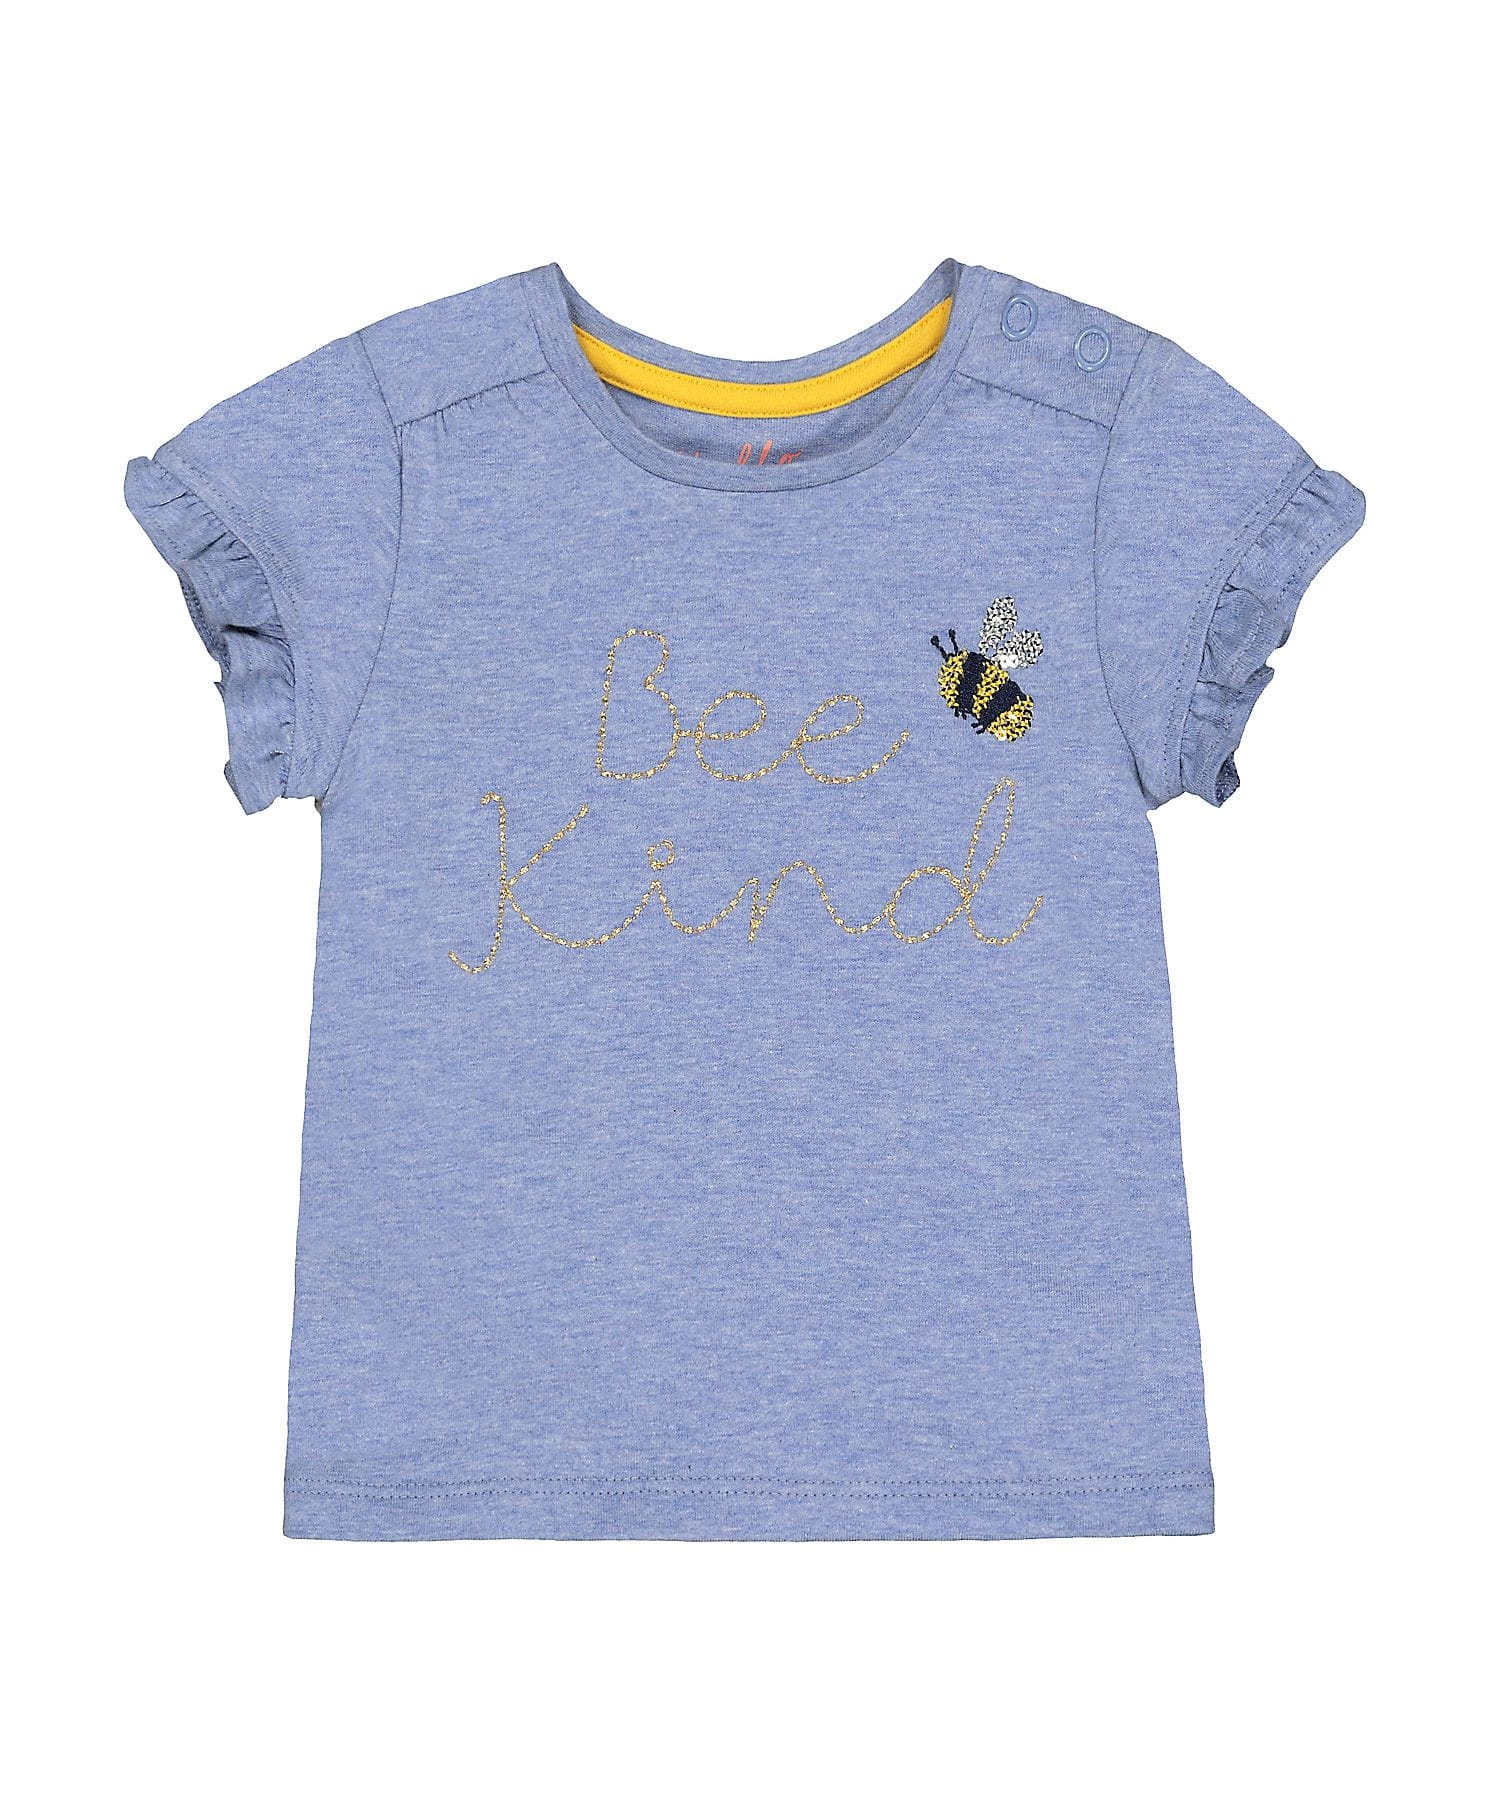 Mothercare | Girls Half Sleeves Tops Sequined Bee Design-Blue 0